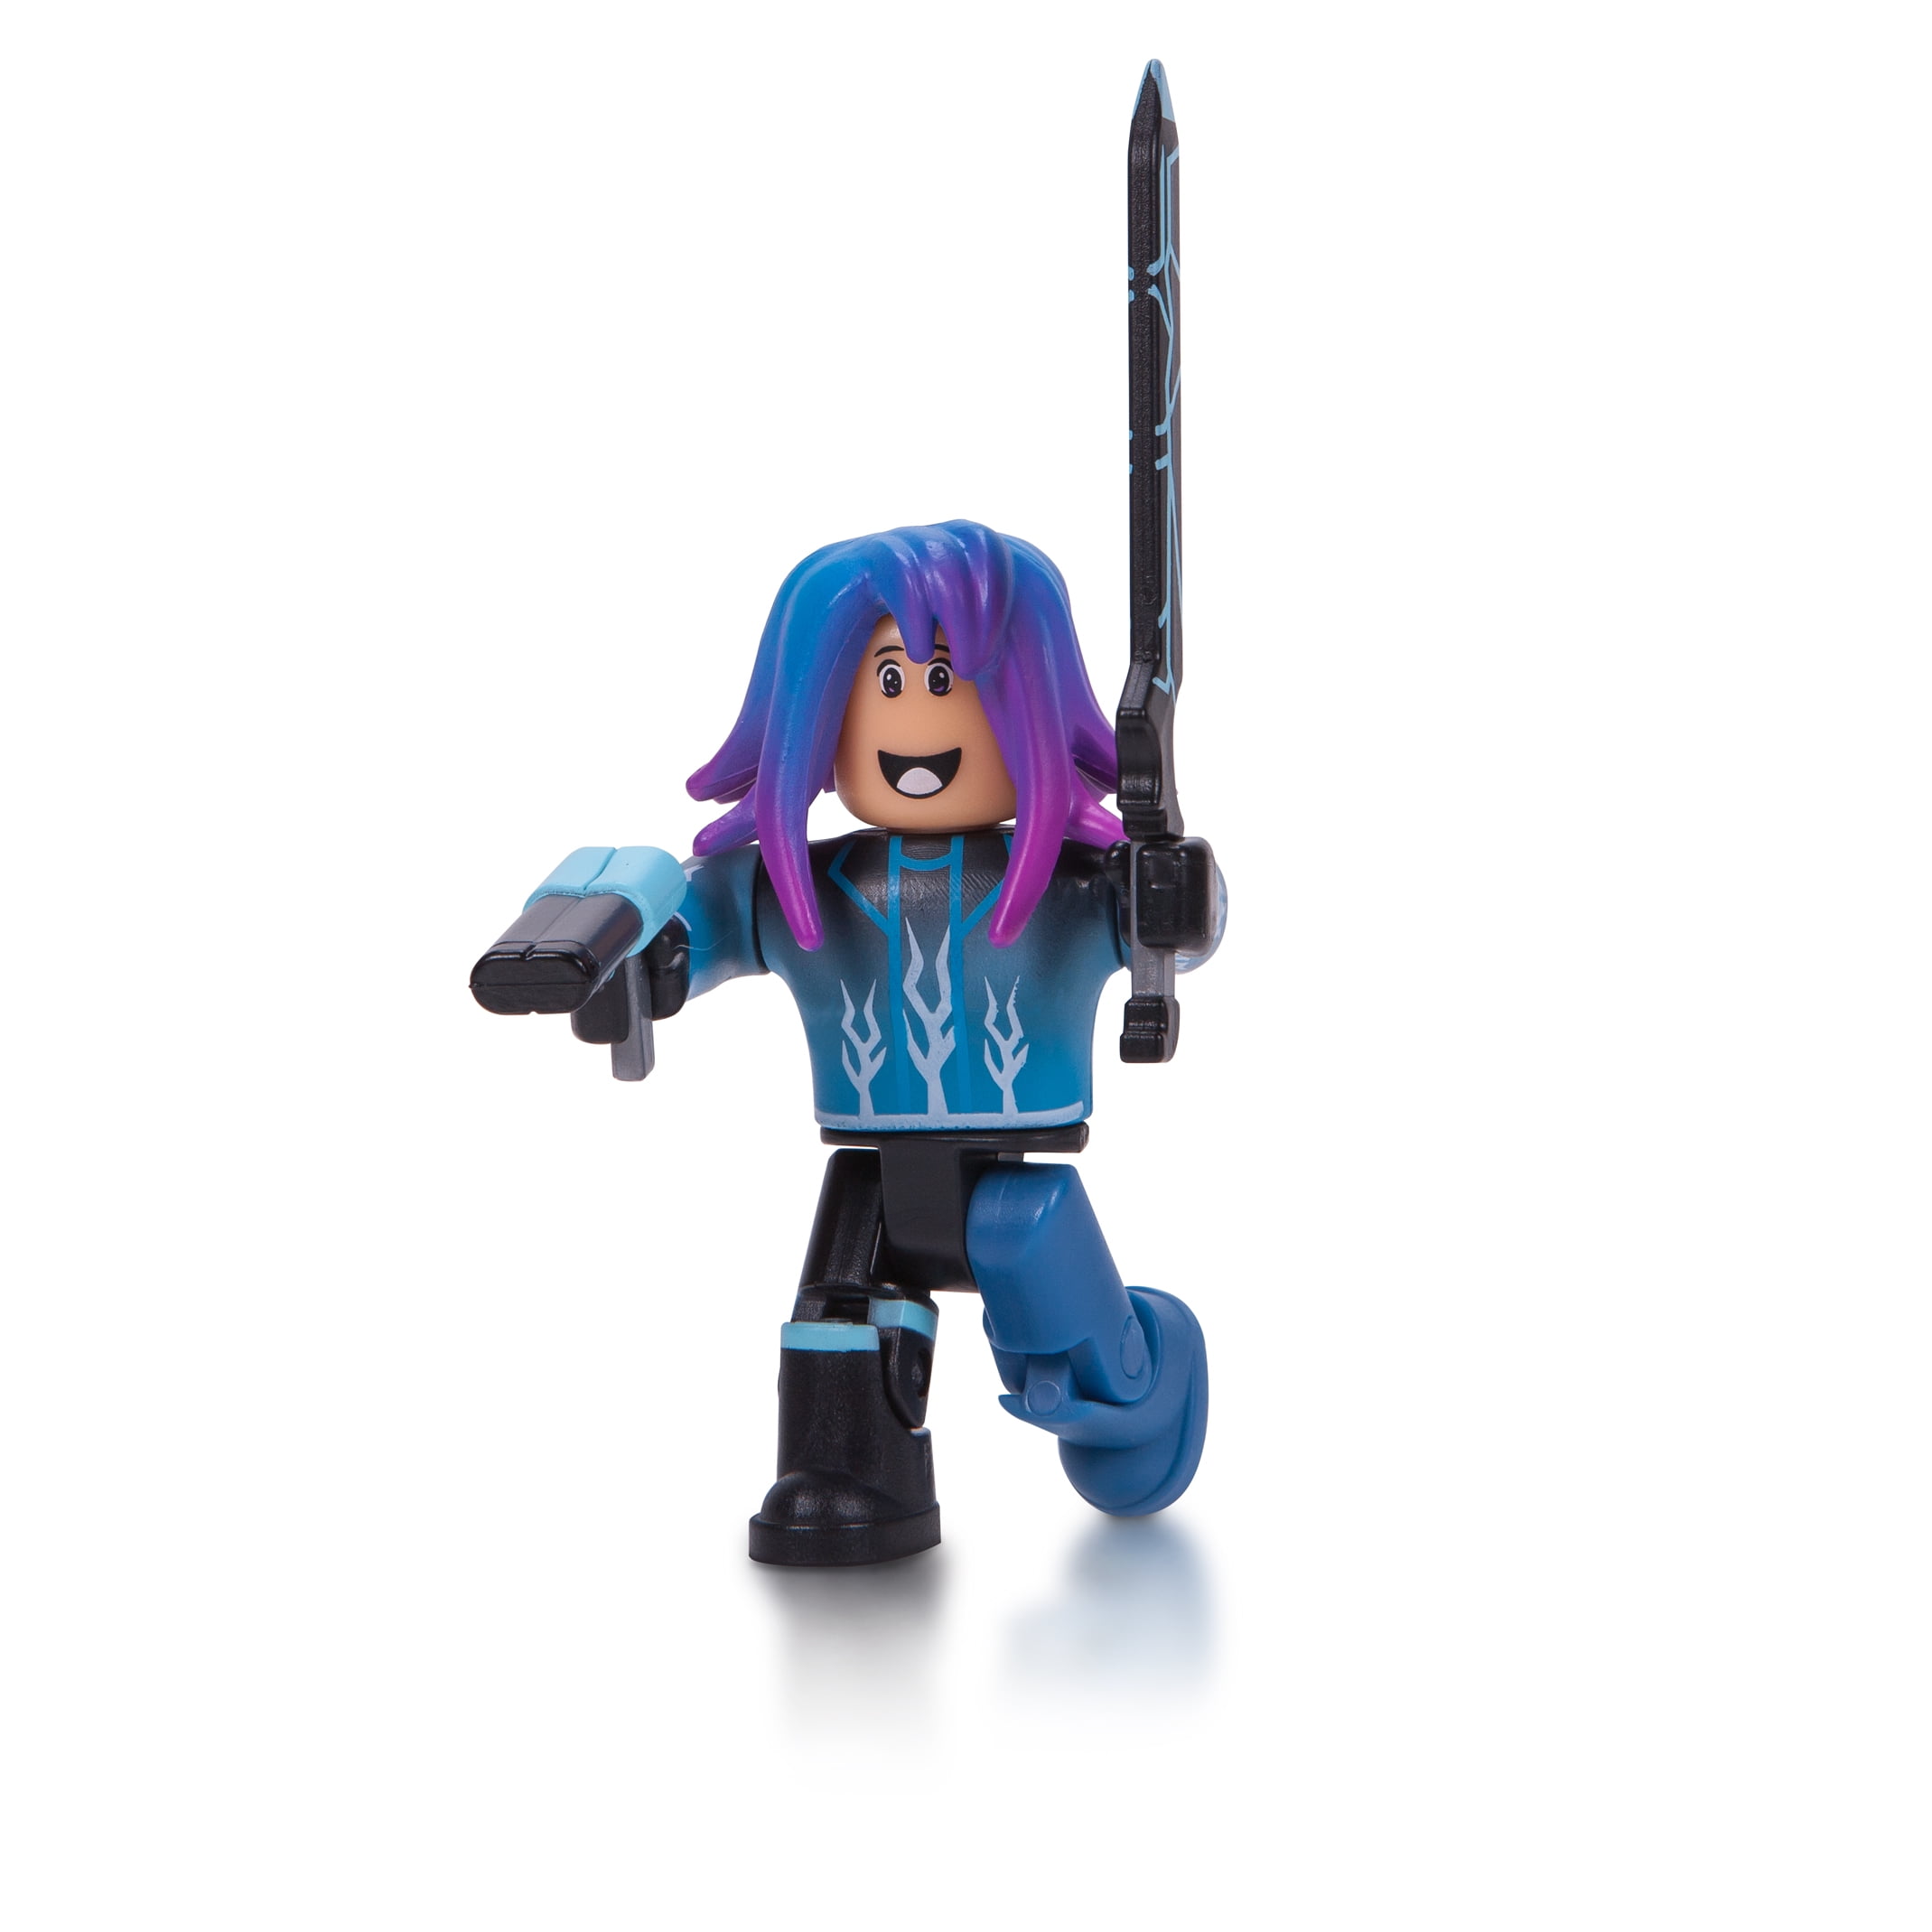 Roblox Action Figure Tim7775 Redguard  with Sword Weapon Boy Toy Gift 